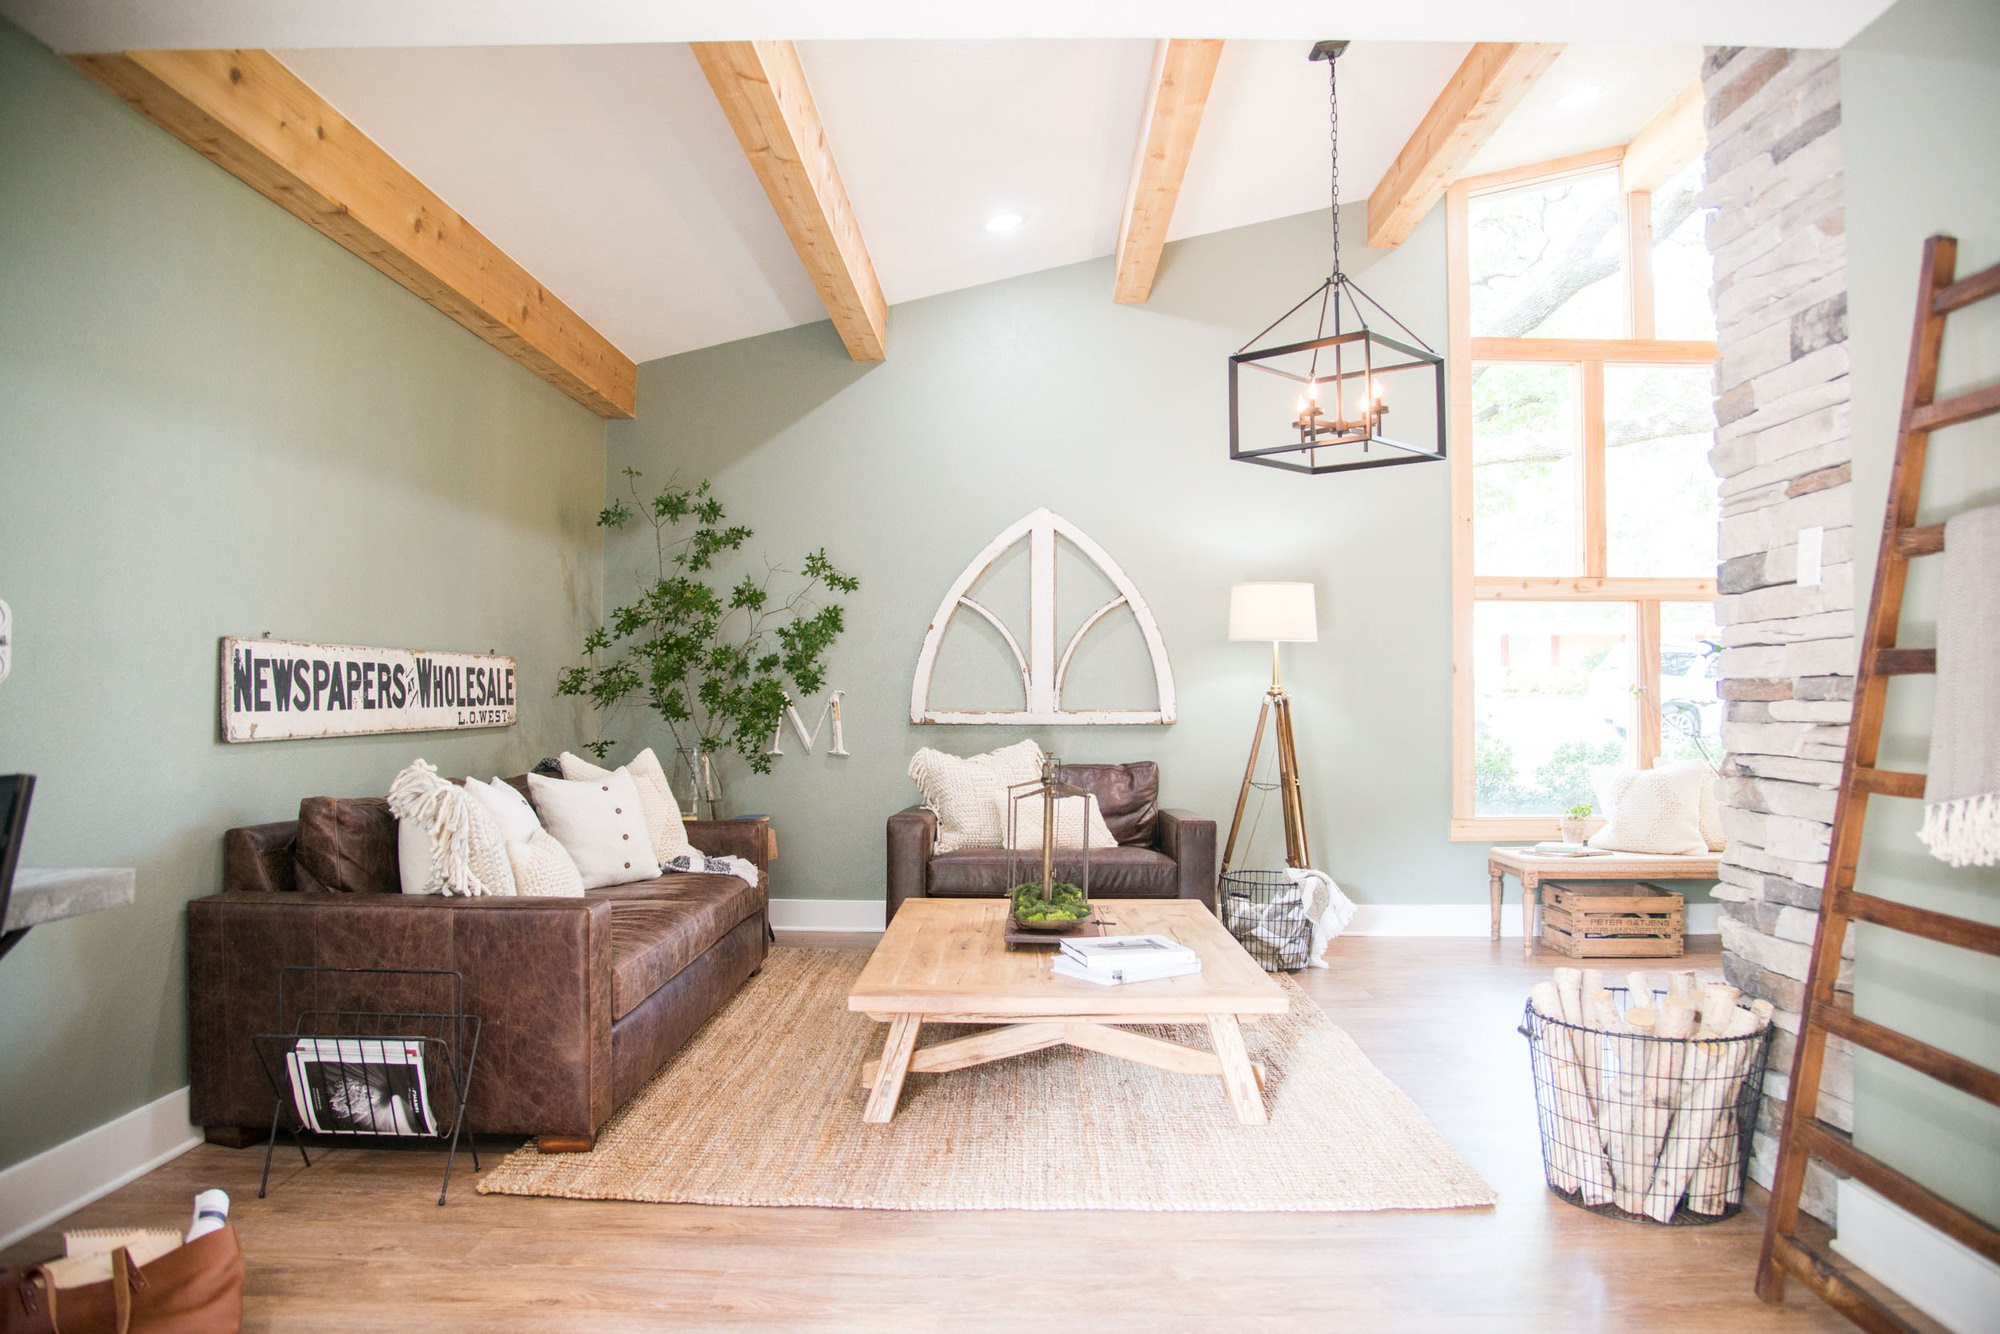 Farmhouse Living Room Paint Colors
 How to Choose the Perfect Farmhouse Paint Colors